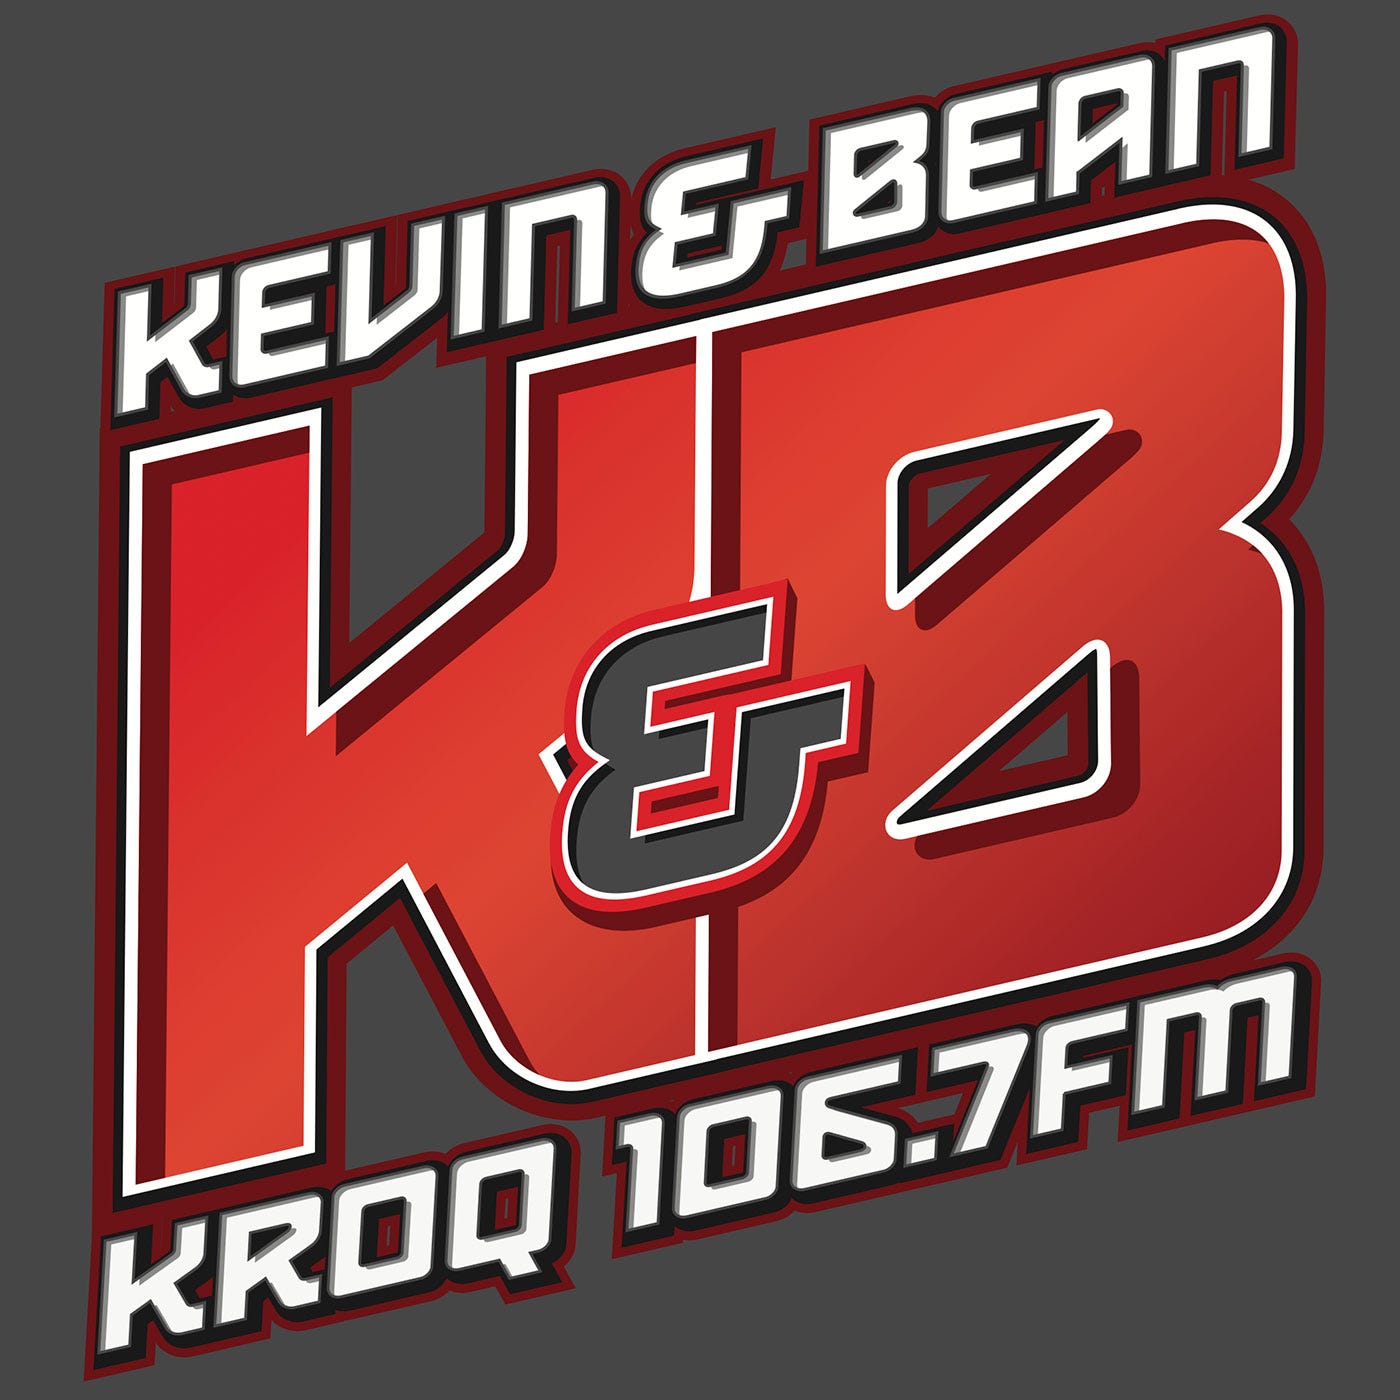 K&B Podcast: Monday, November 25th with guests Michael Schneider and Jenn & Cody Decker